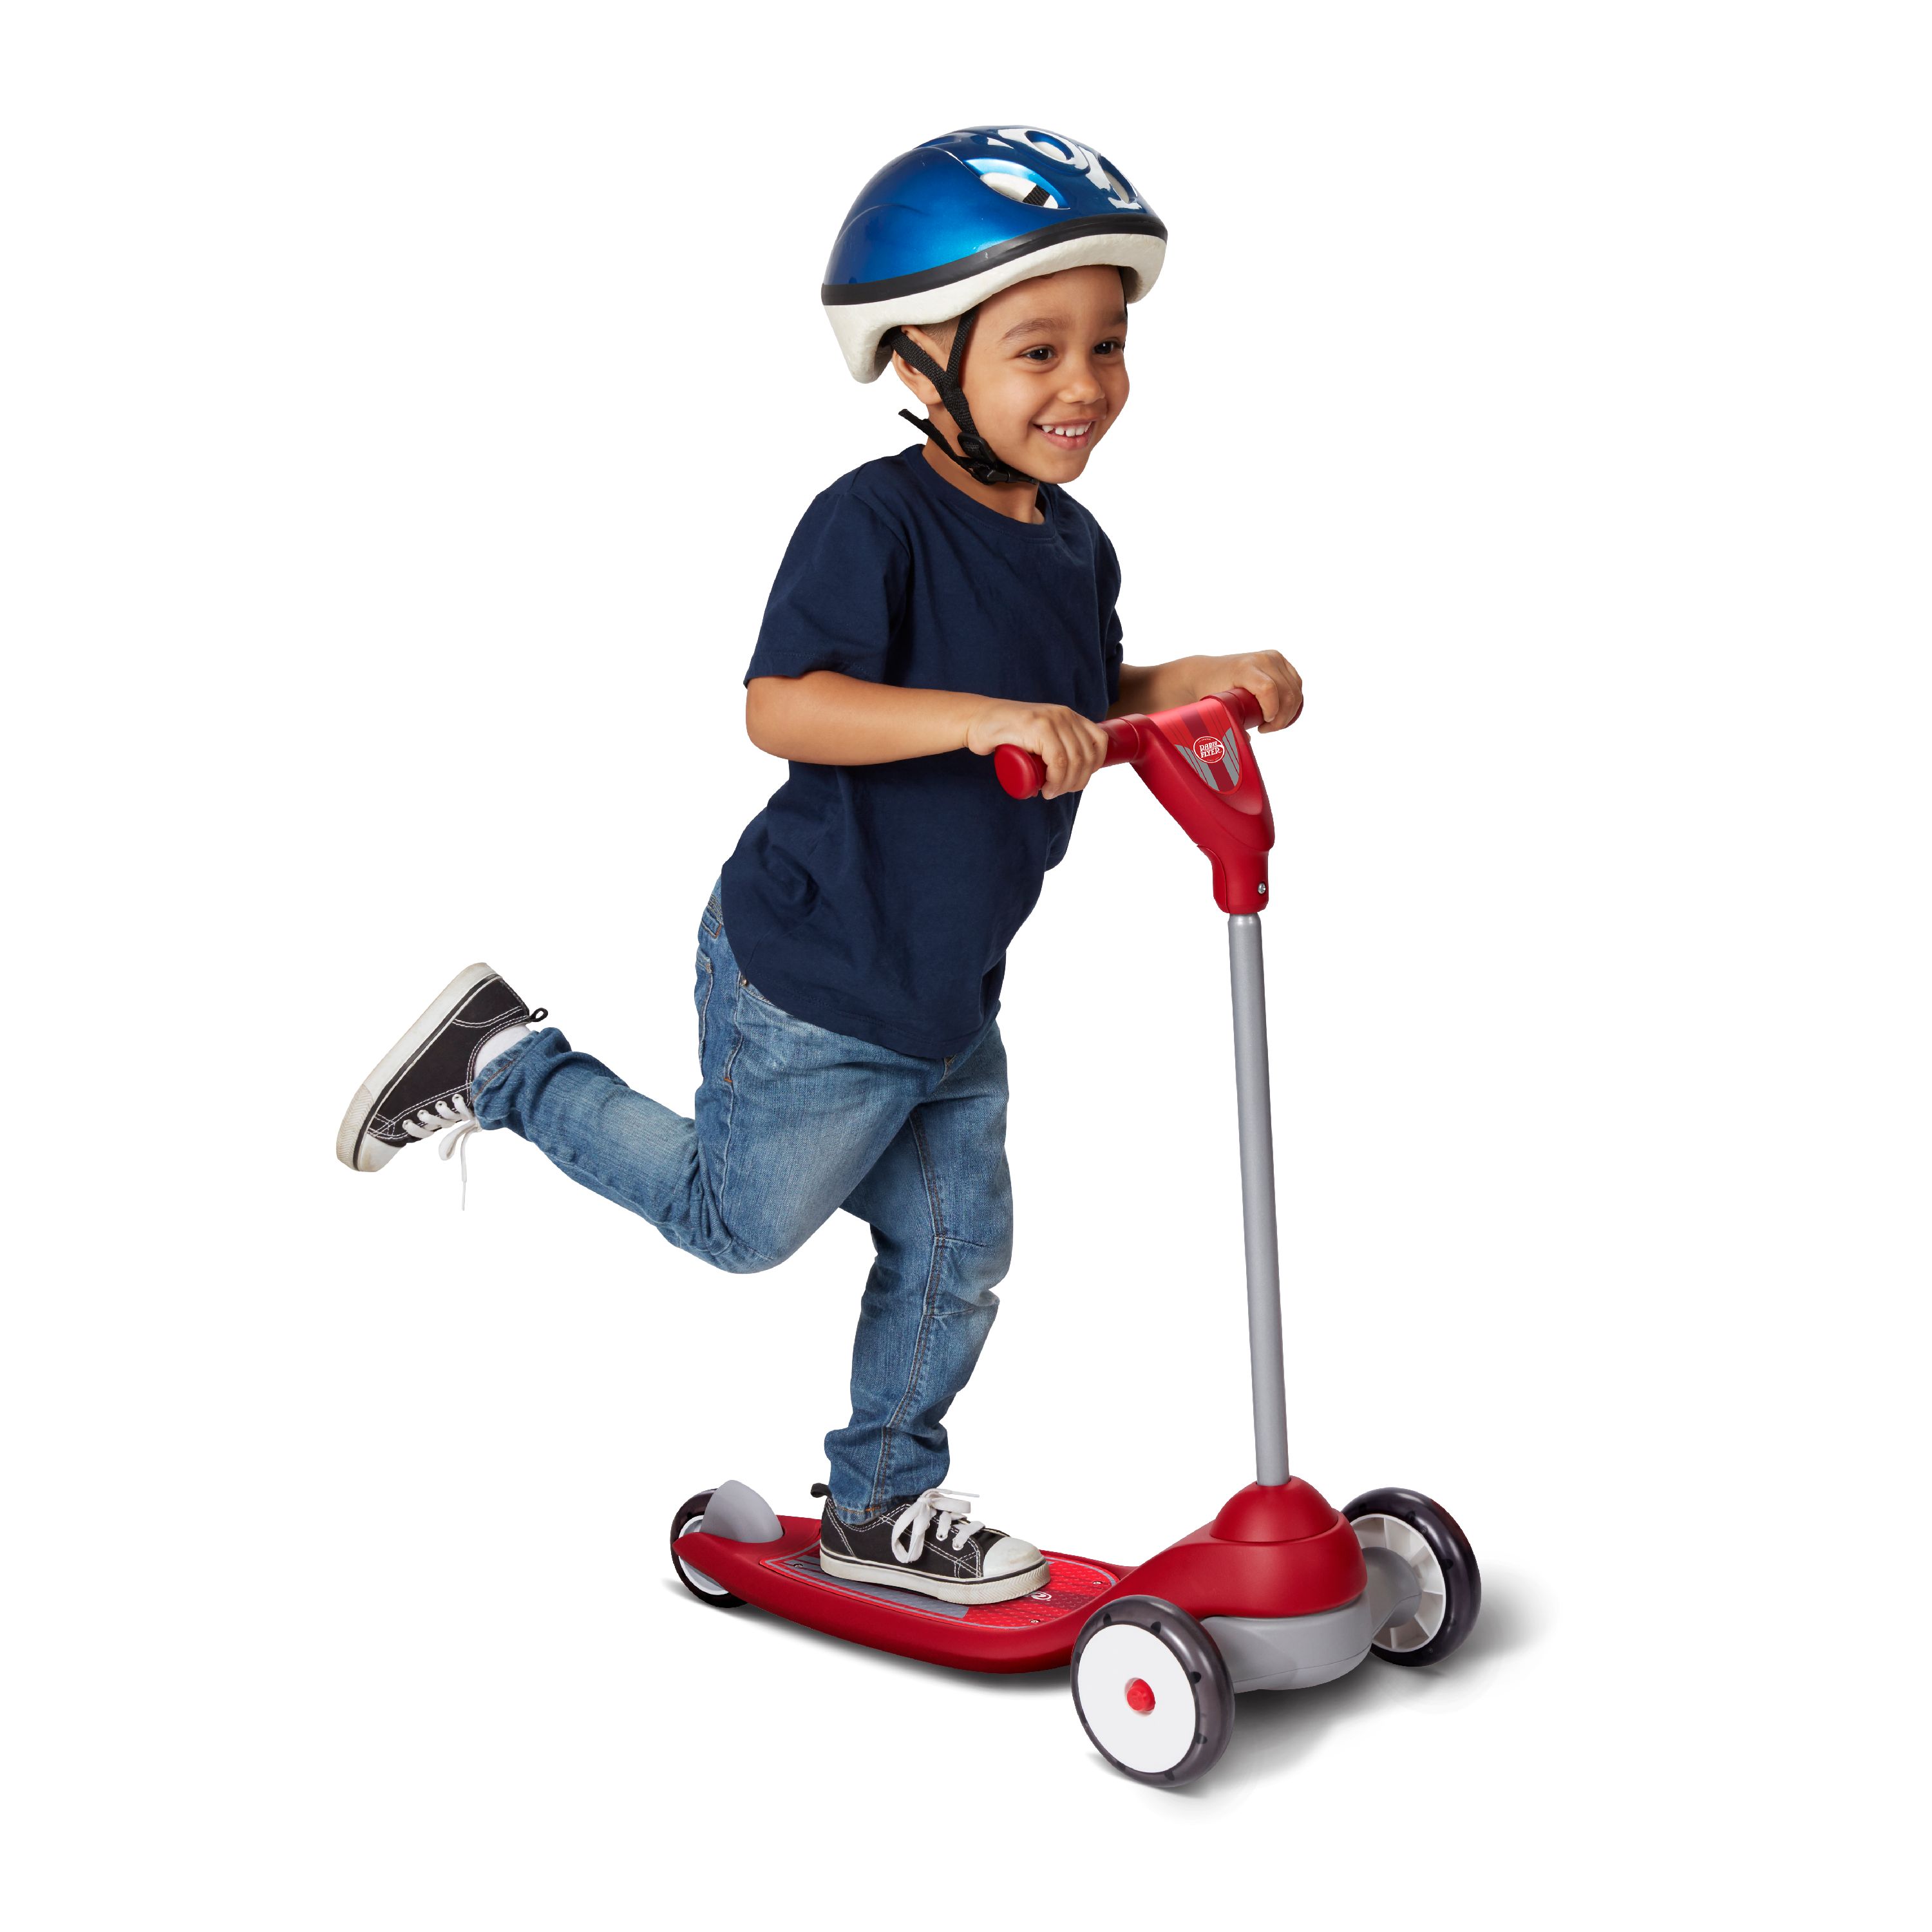 Radio Flyer, My 1st Scooter Sport, Three Wheel Scooter, Red - image 5 of 7